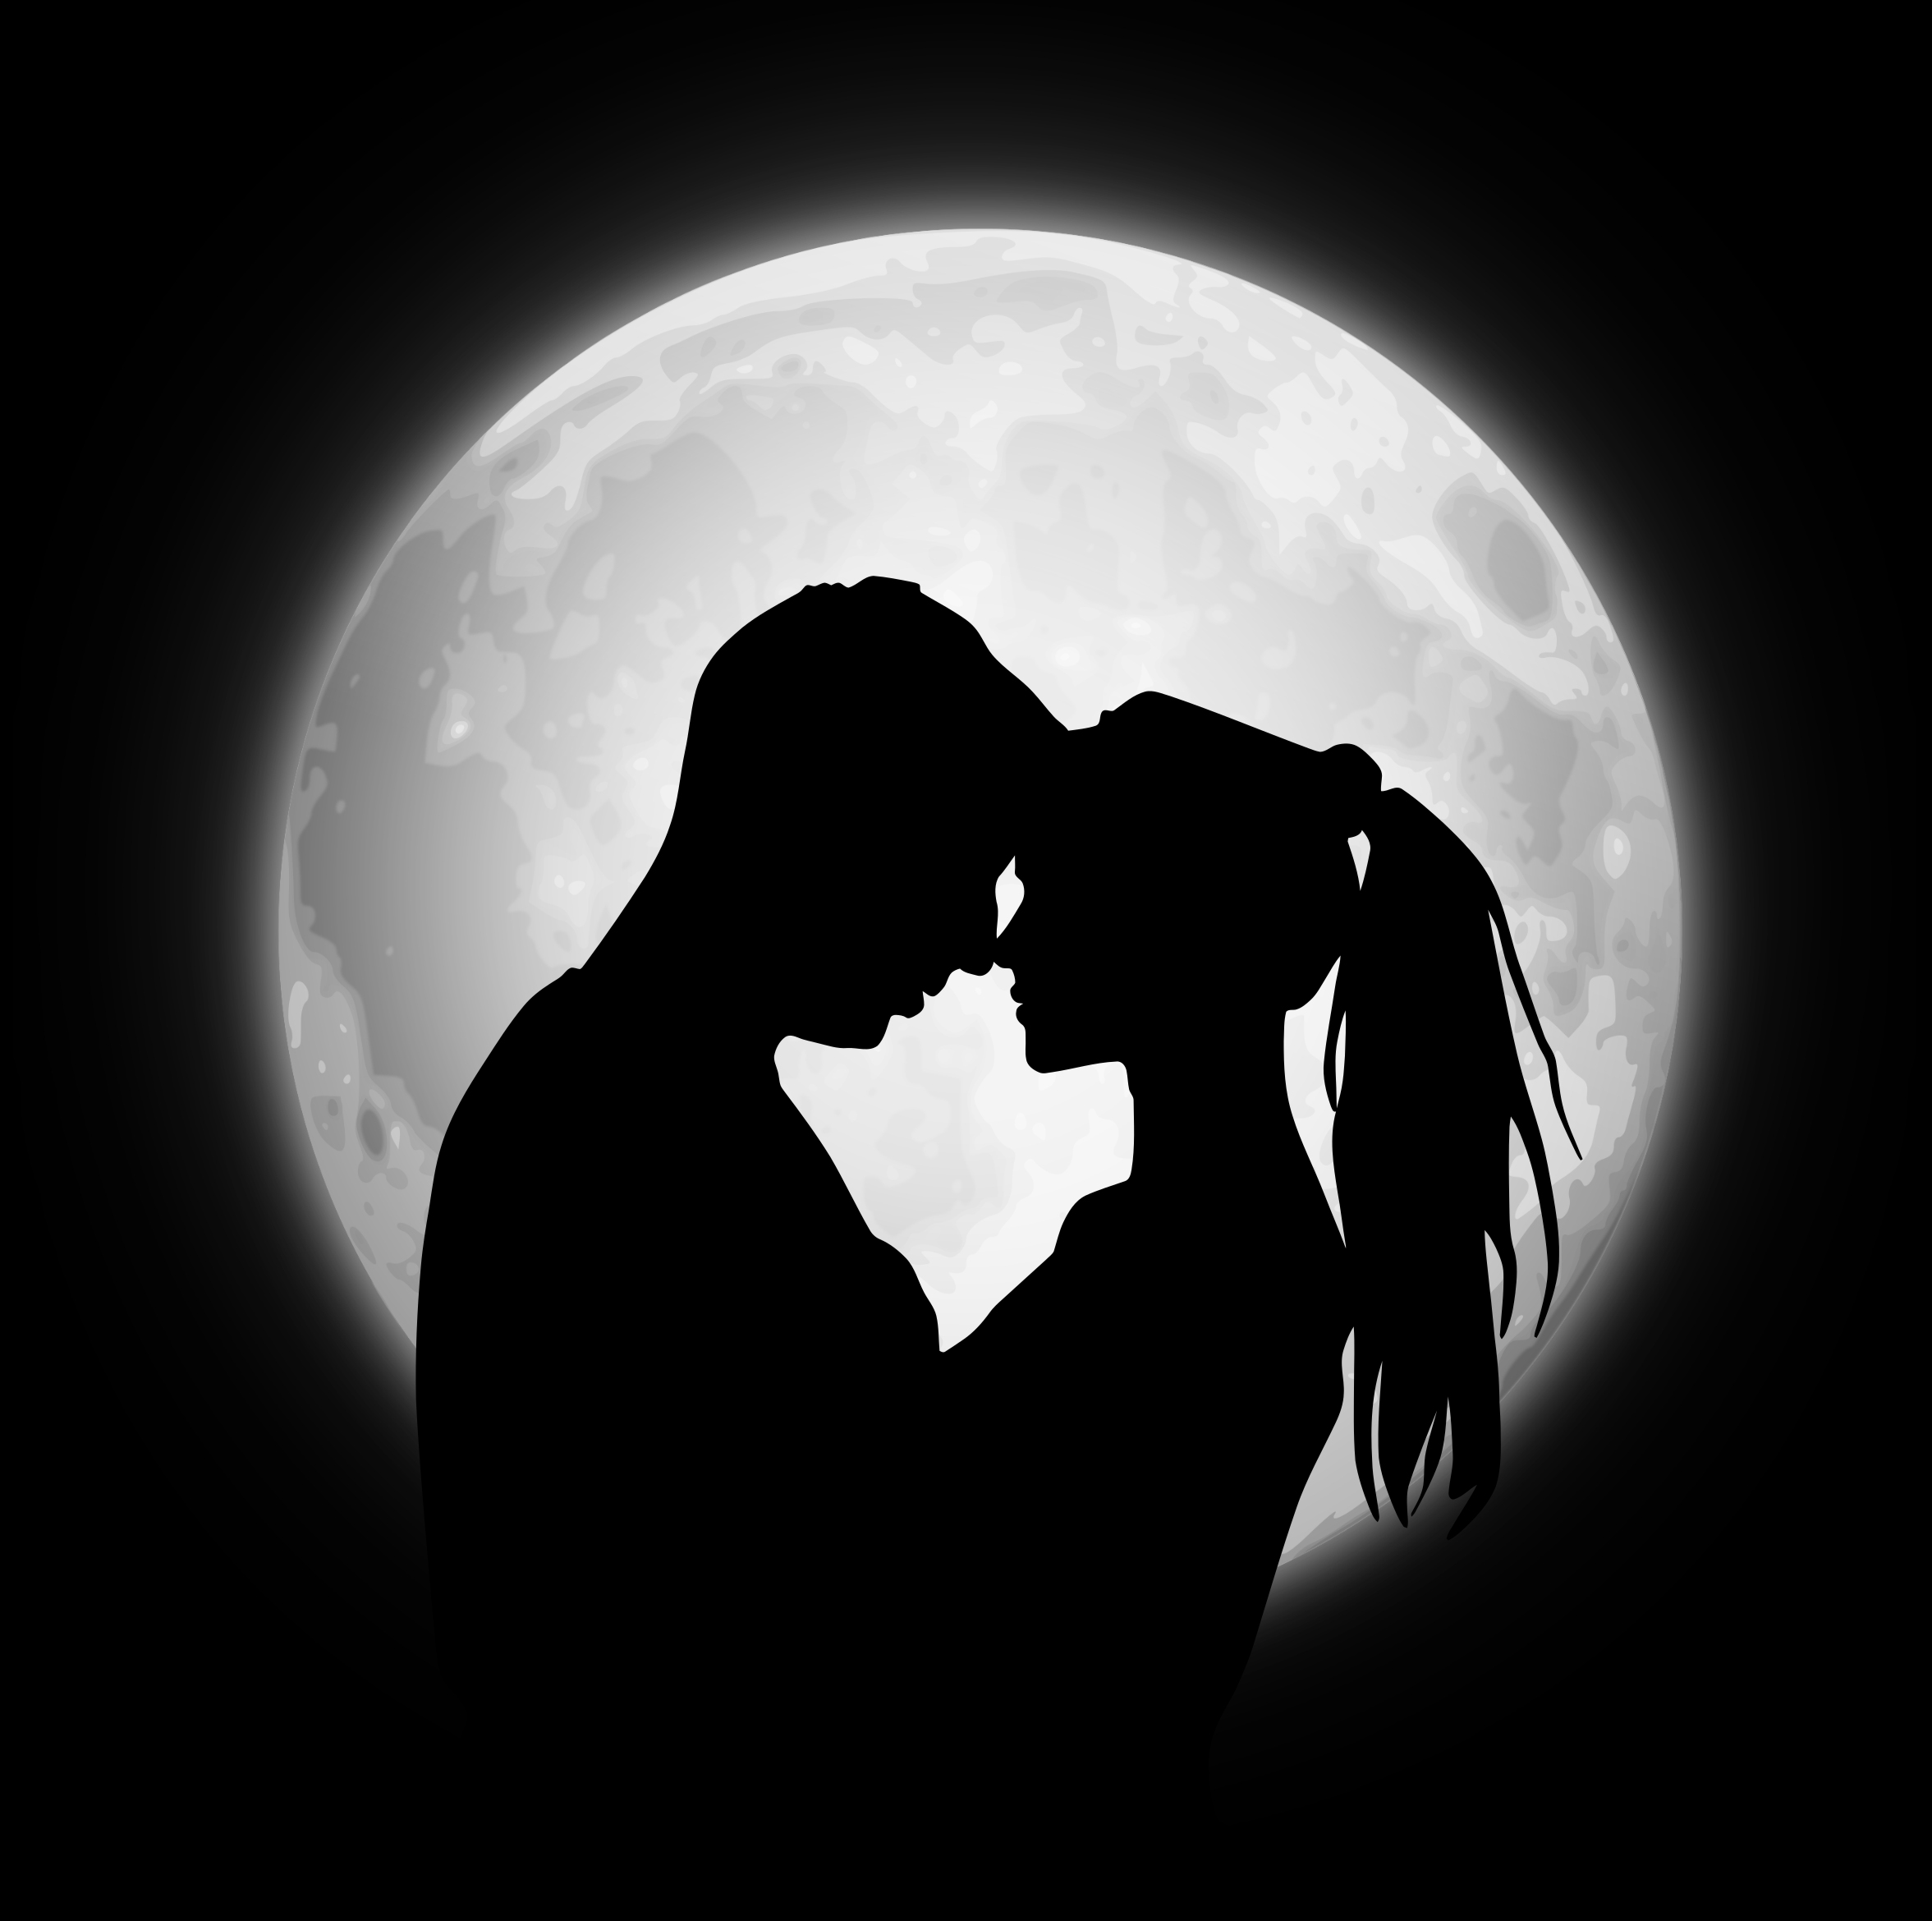 love, pair, moon, silhouettes, couple wallpaper for mobile